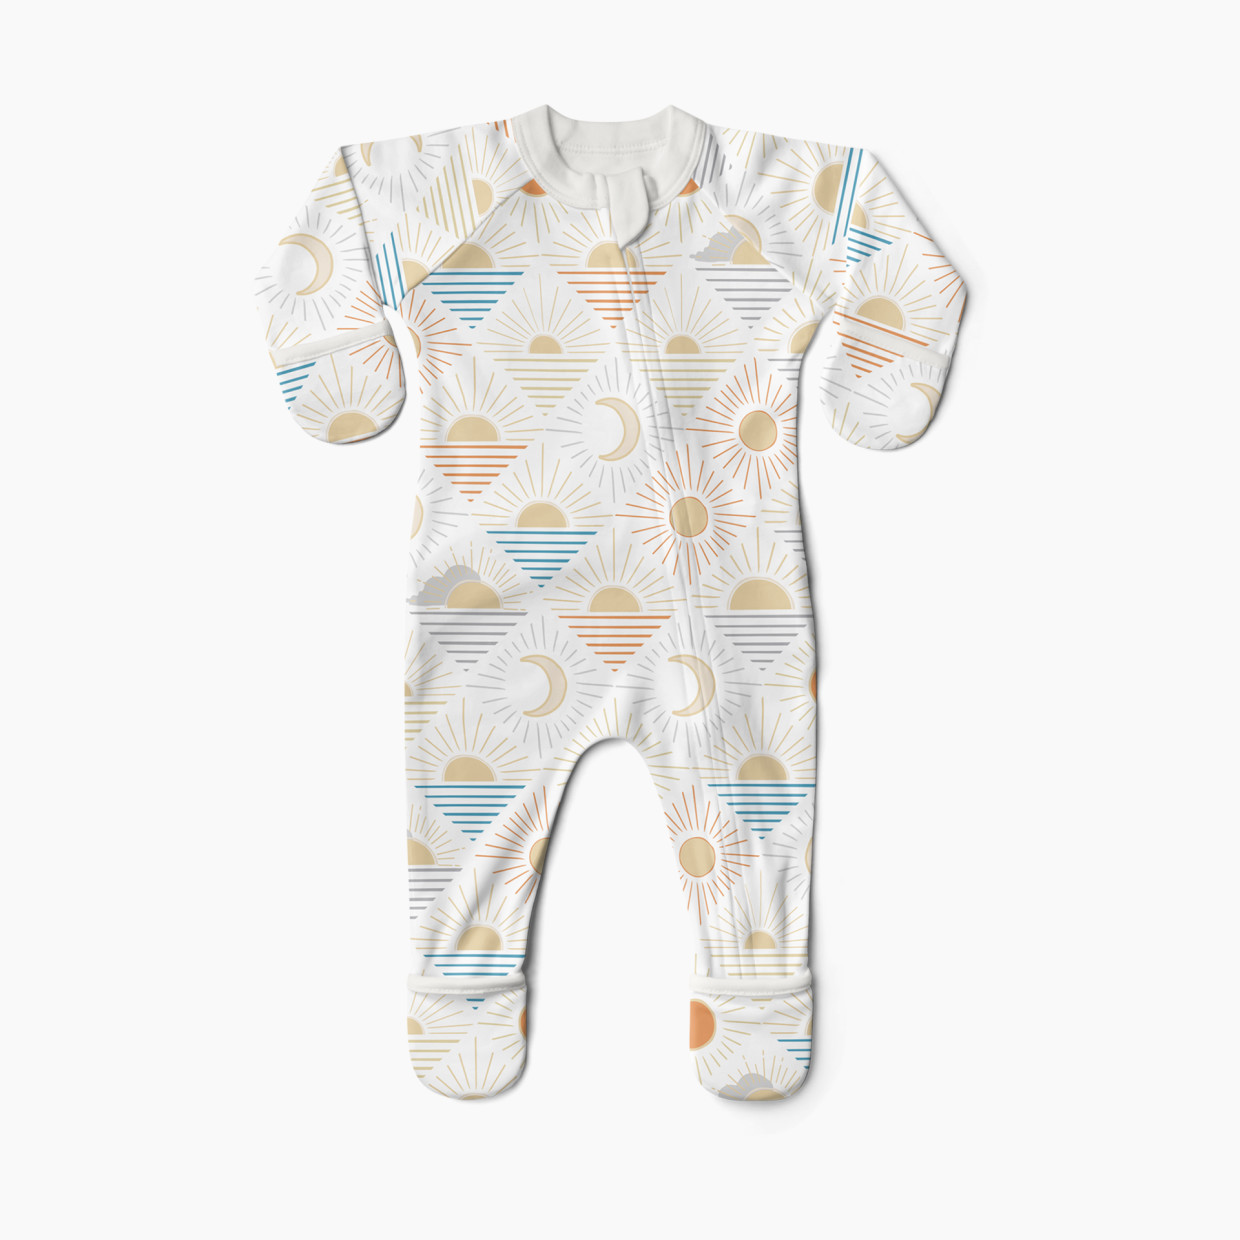 Goumi Kids x Babylist Grow With You Footie - Loose Fit - Celestial, 3-6 M.